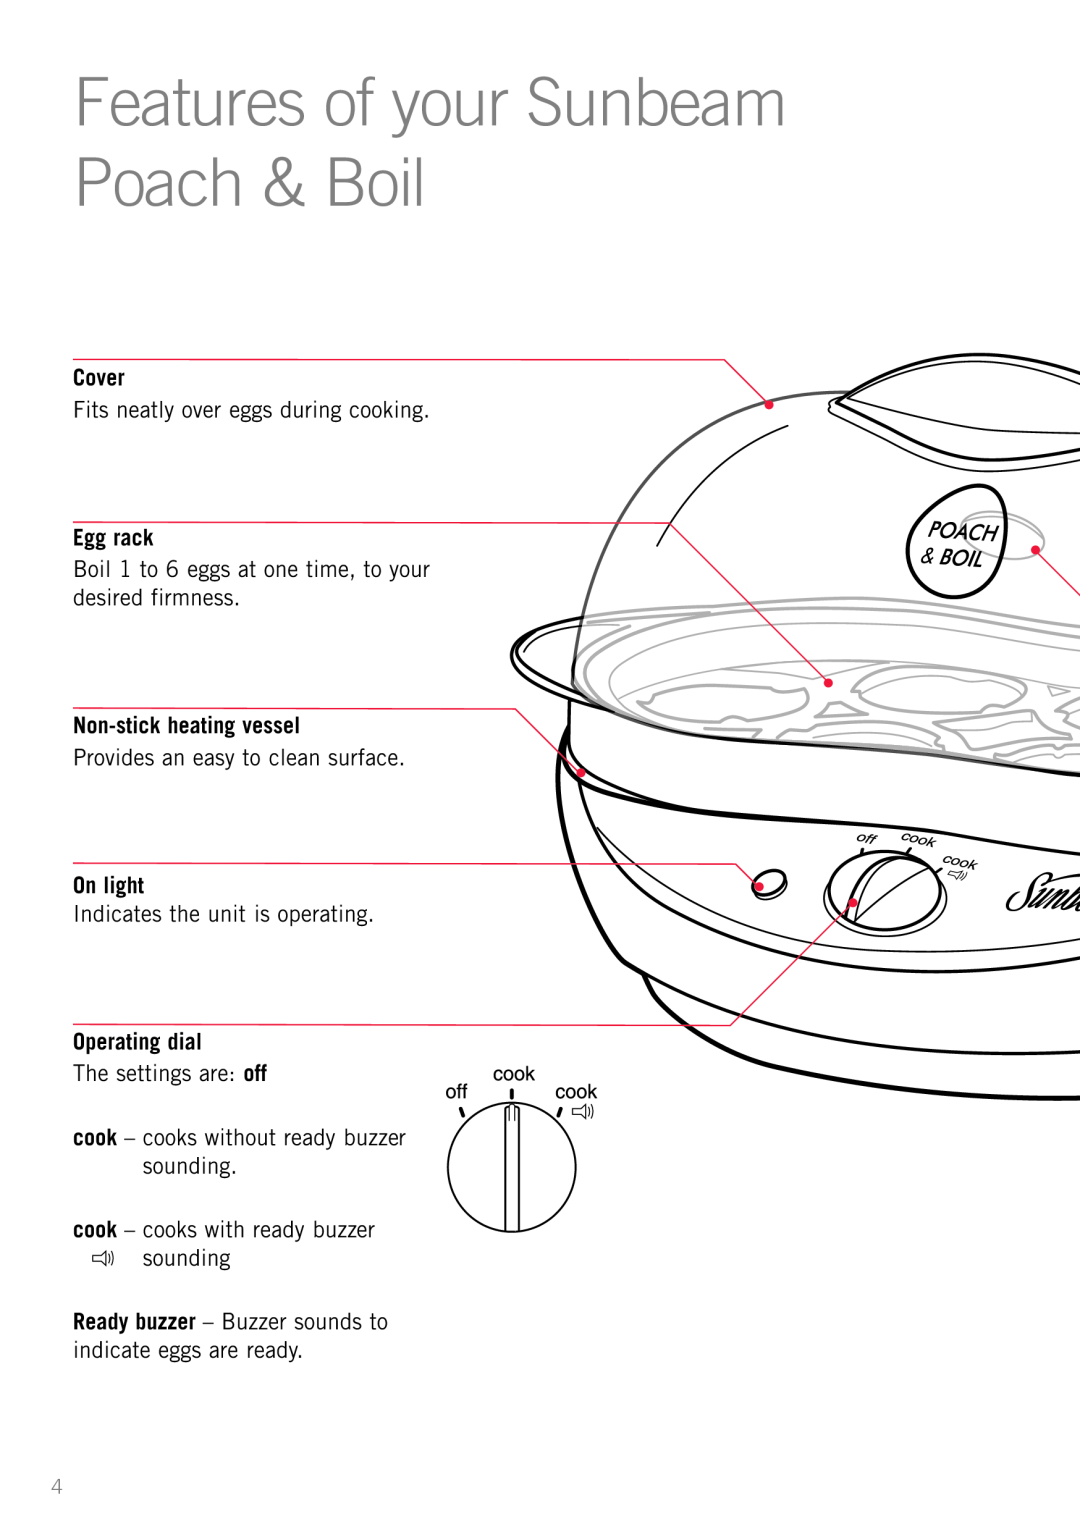 Sunbeam EC1300 Features of your Sunbeam Poach & Boil, Cover, Egg rack, Non-stick heating vessel, On light, Operating dial 